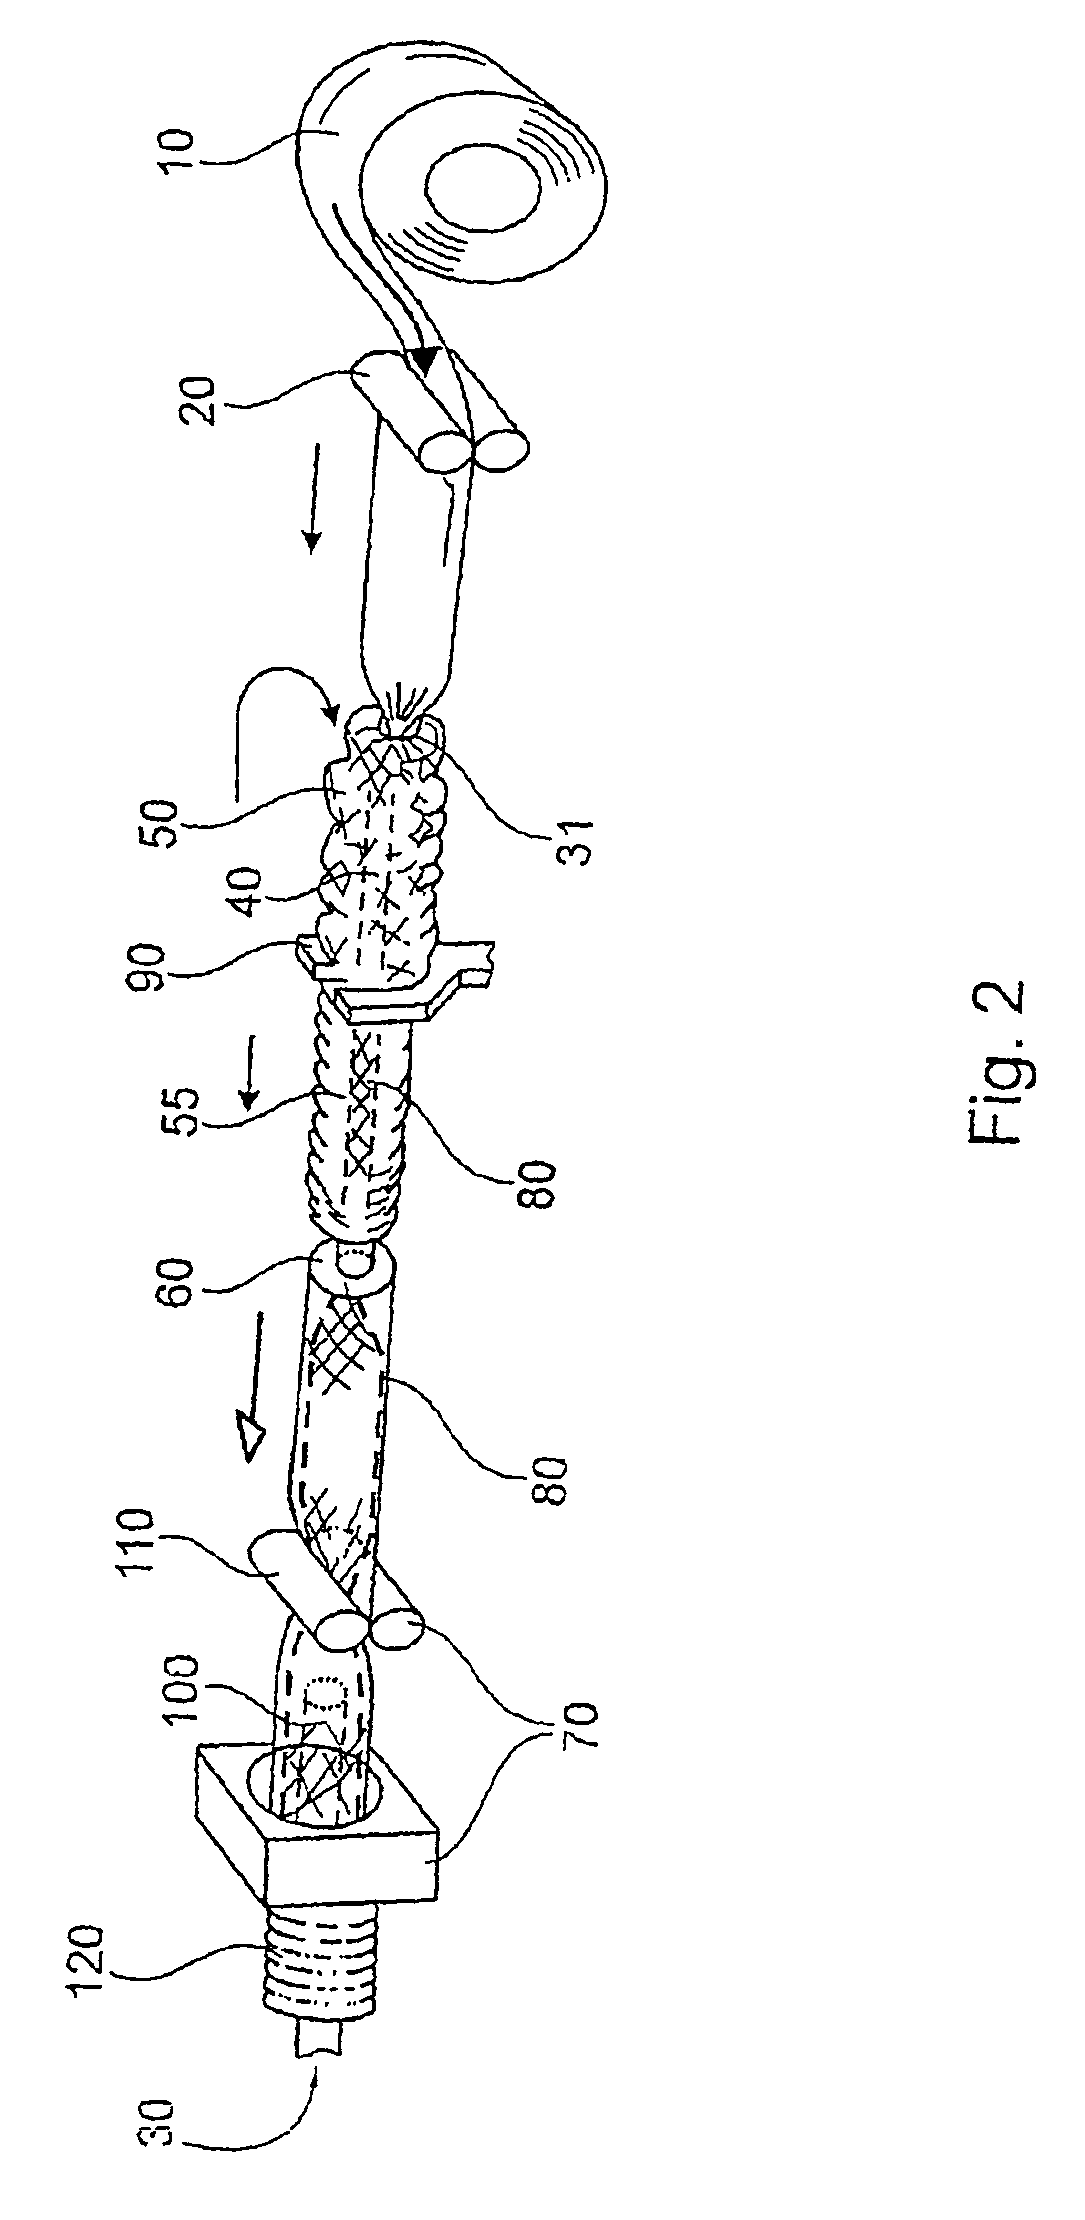 Process for producing a composite food casing